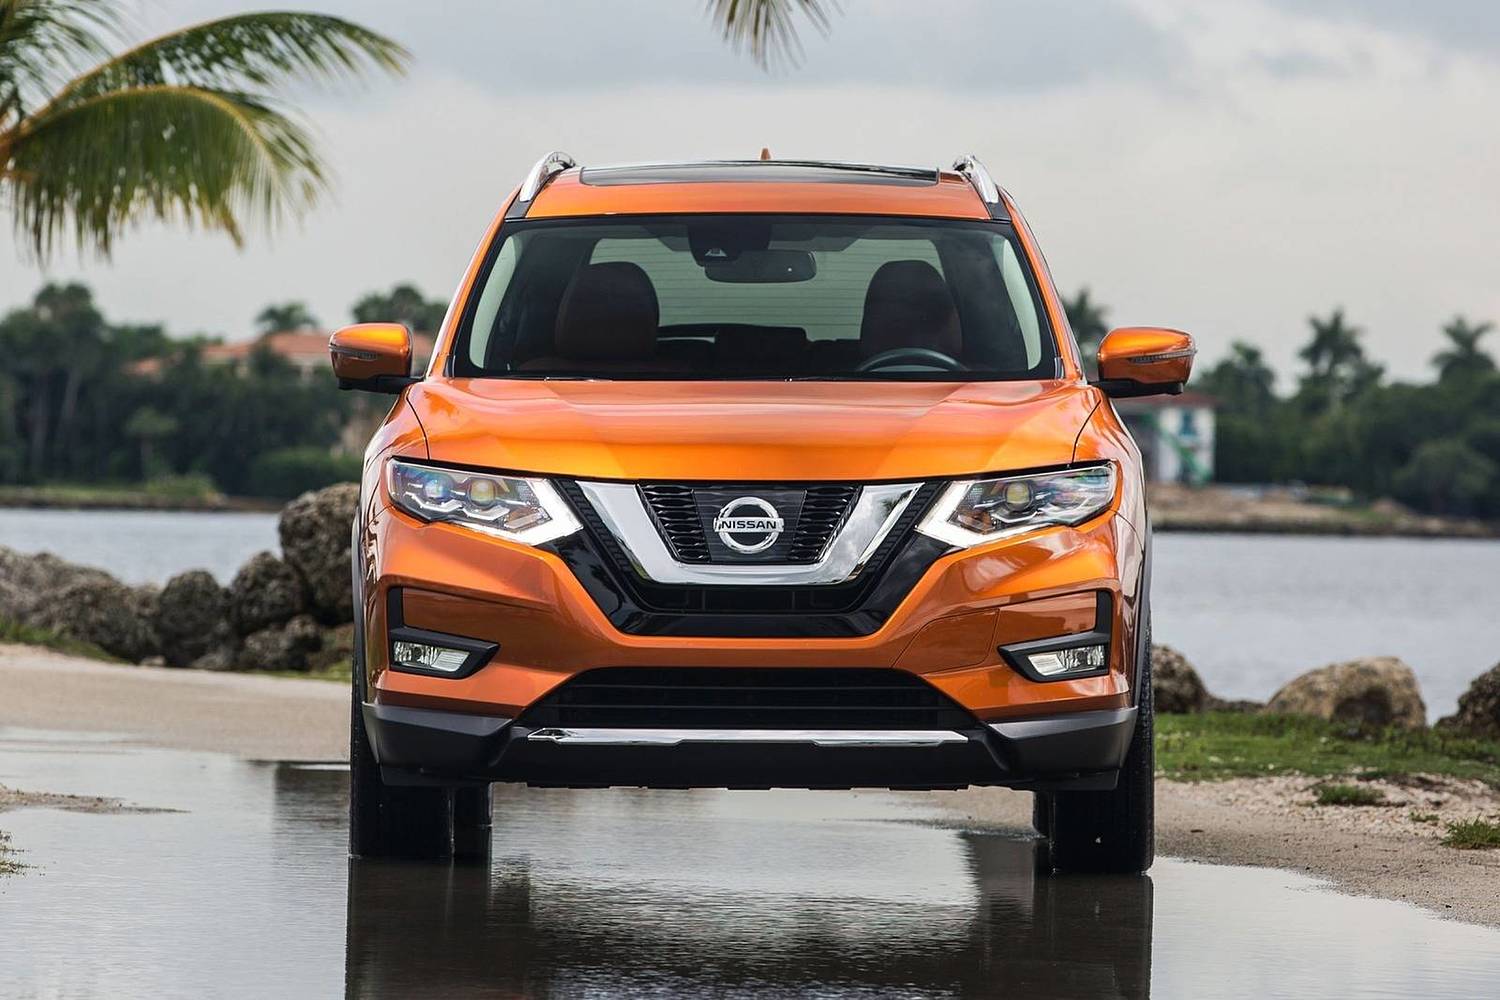 Nissan Rogue SL 4dr SUV Exterior (2017 model year shown)